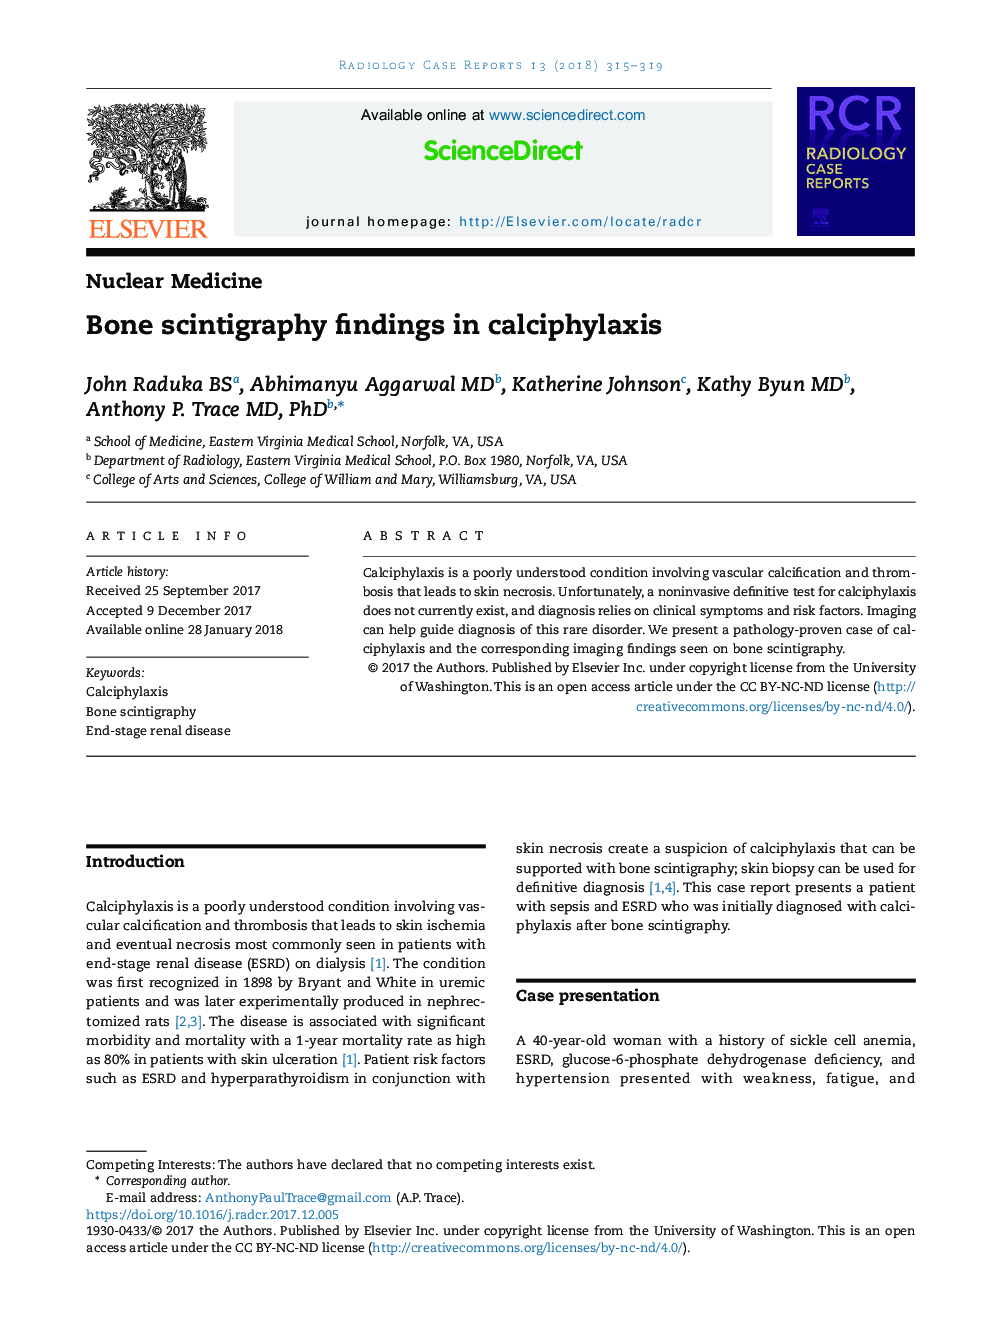 Bone scintigraphy findings in calciphylaxis